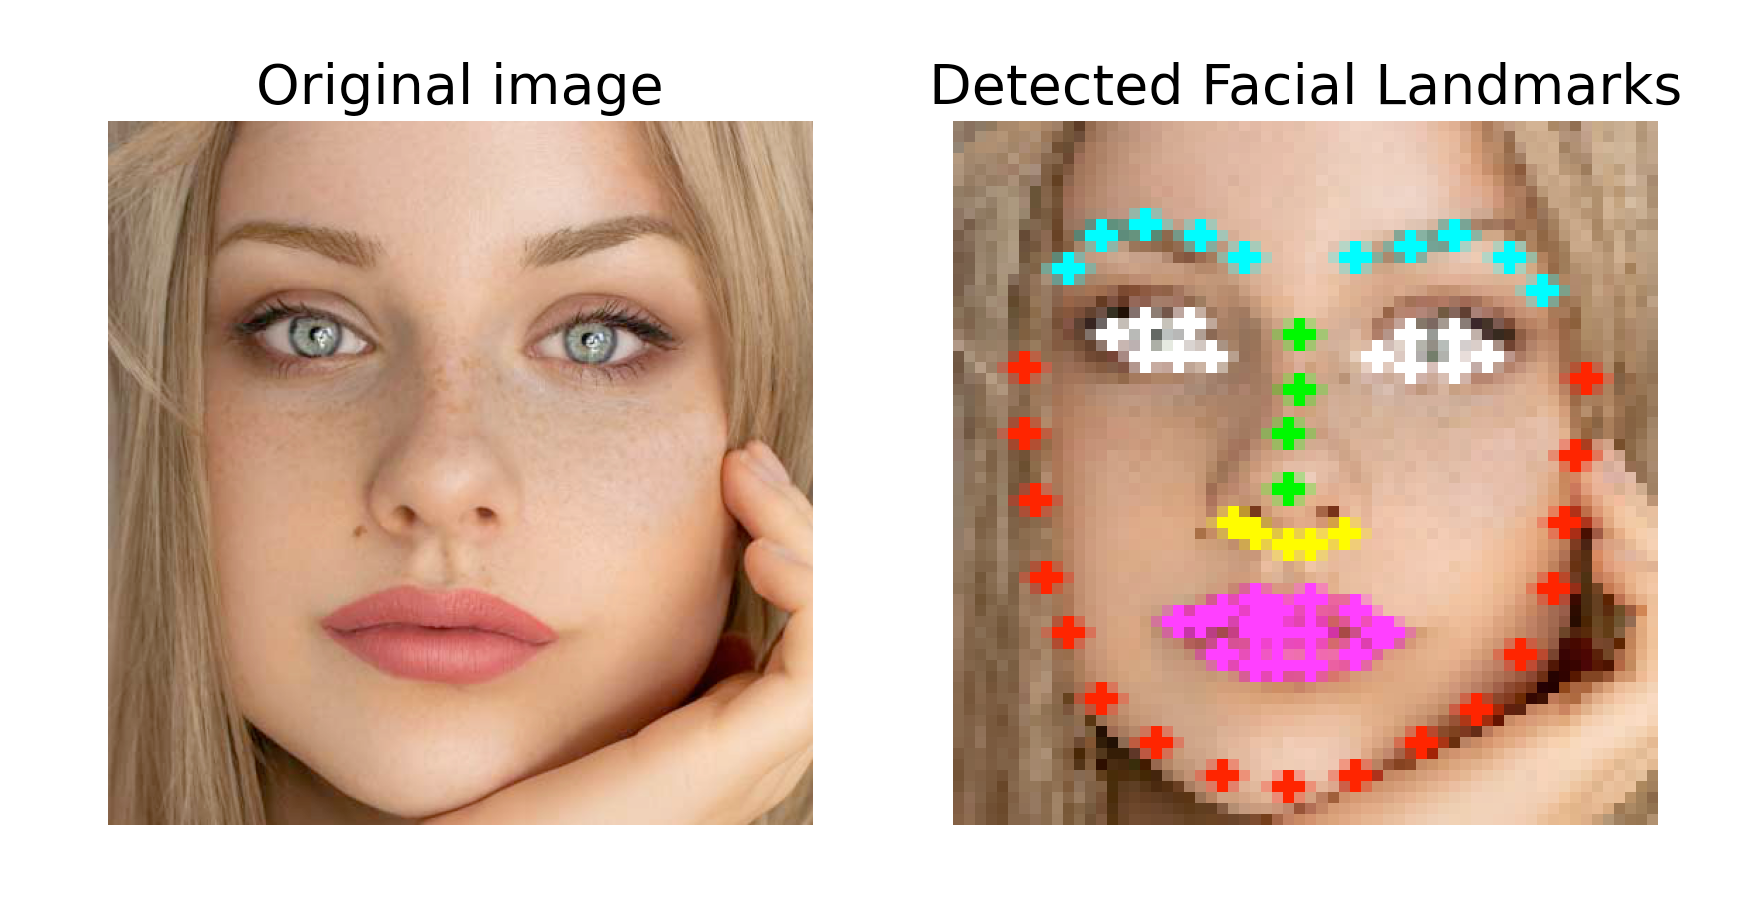 How to Perform a Facial Landmark Detection with Keras